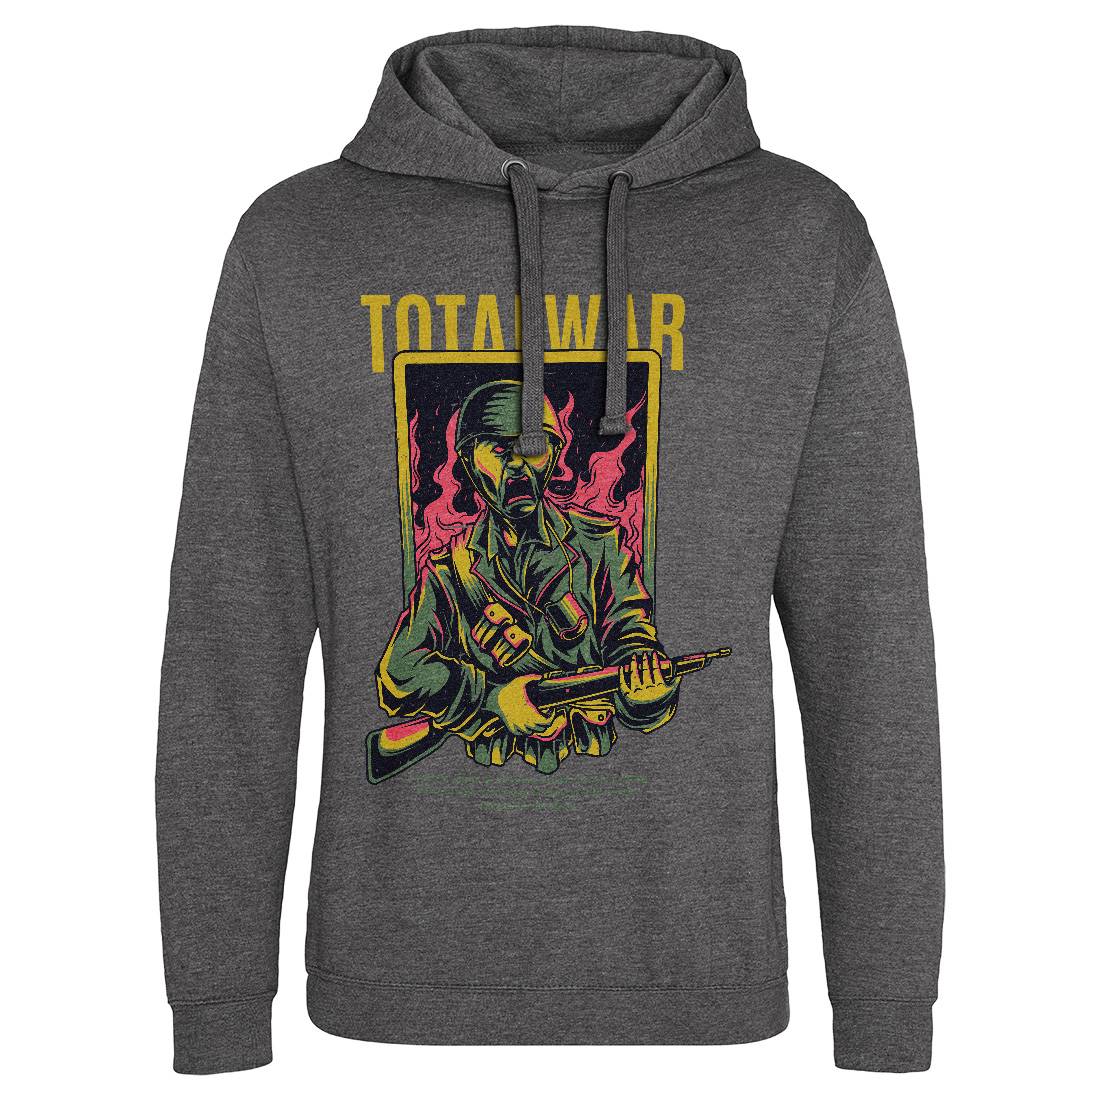 Total War Mens Hoodie Without Pocket Army D864